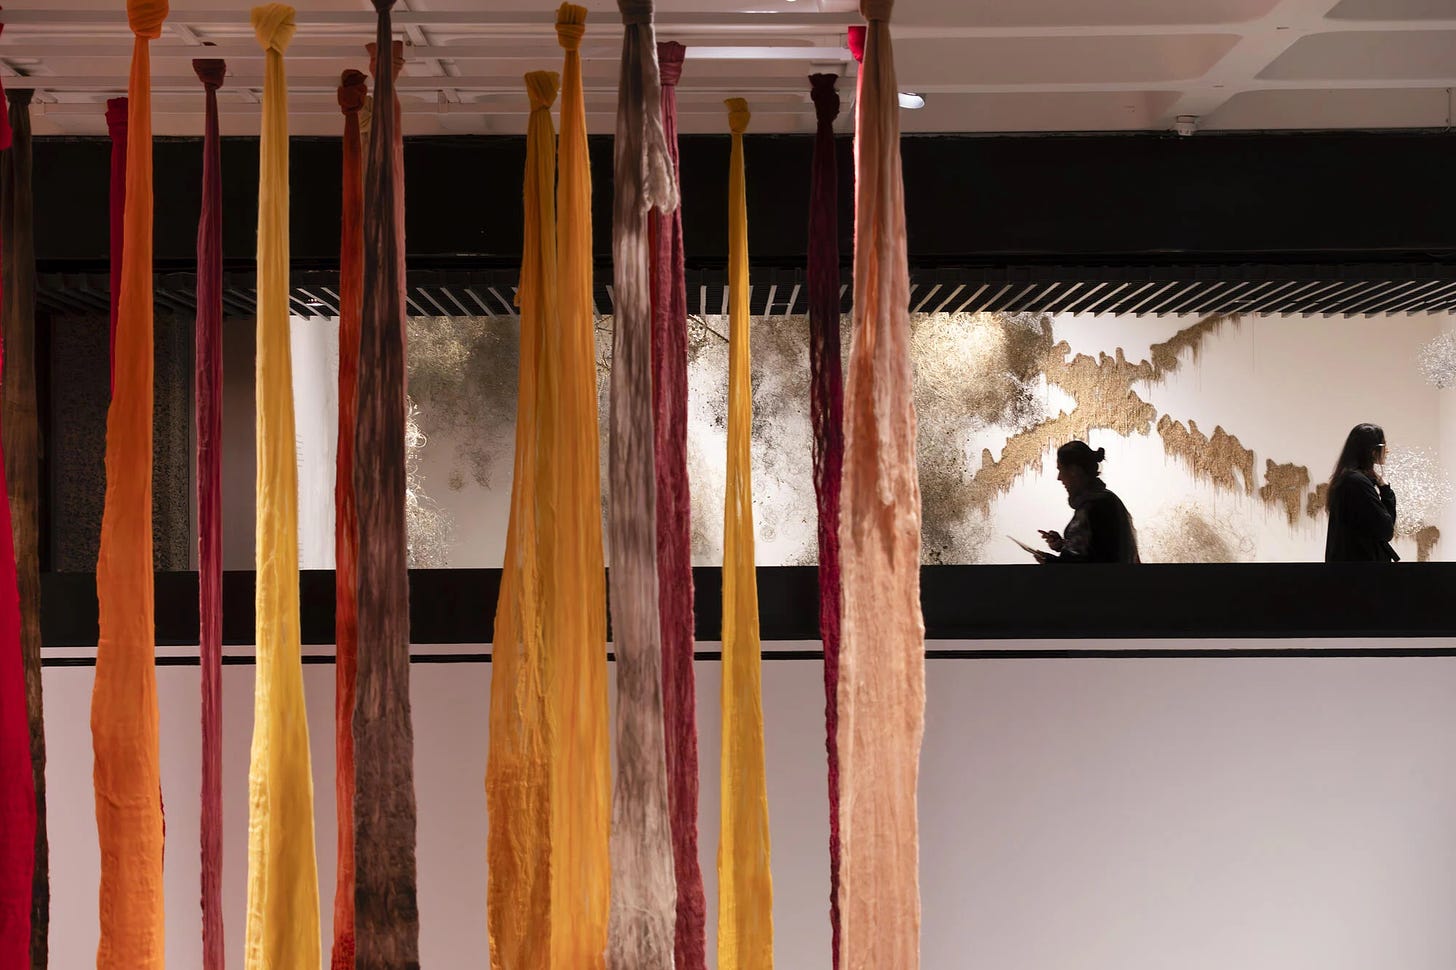 View of works at Barbican’s ‘Unravel: The Power and Politics of Textiles in Art’ exhibition, including Cecilia Vicuña’s hanging wool rovings, and Igshaan Adams’ chain metal jewellery weavings [Credit: Barbican].